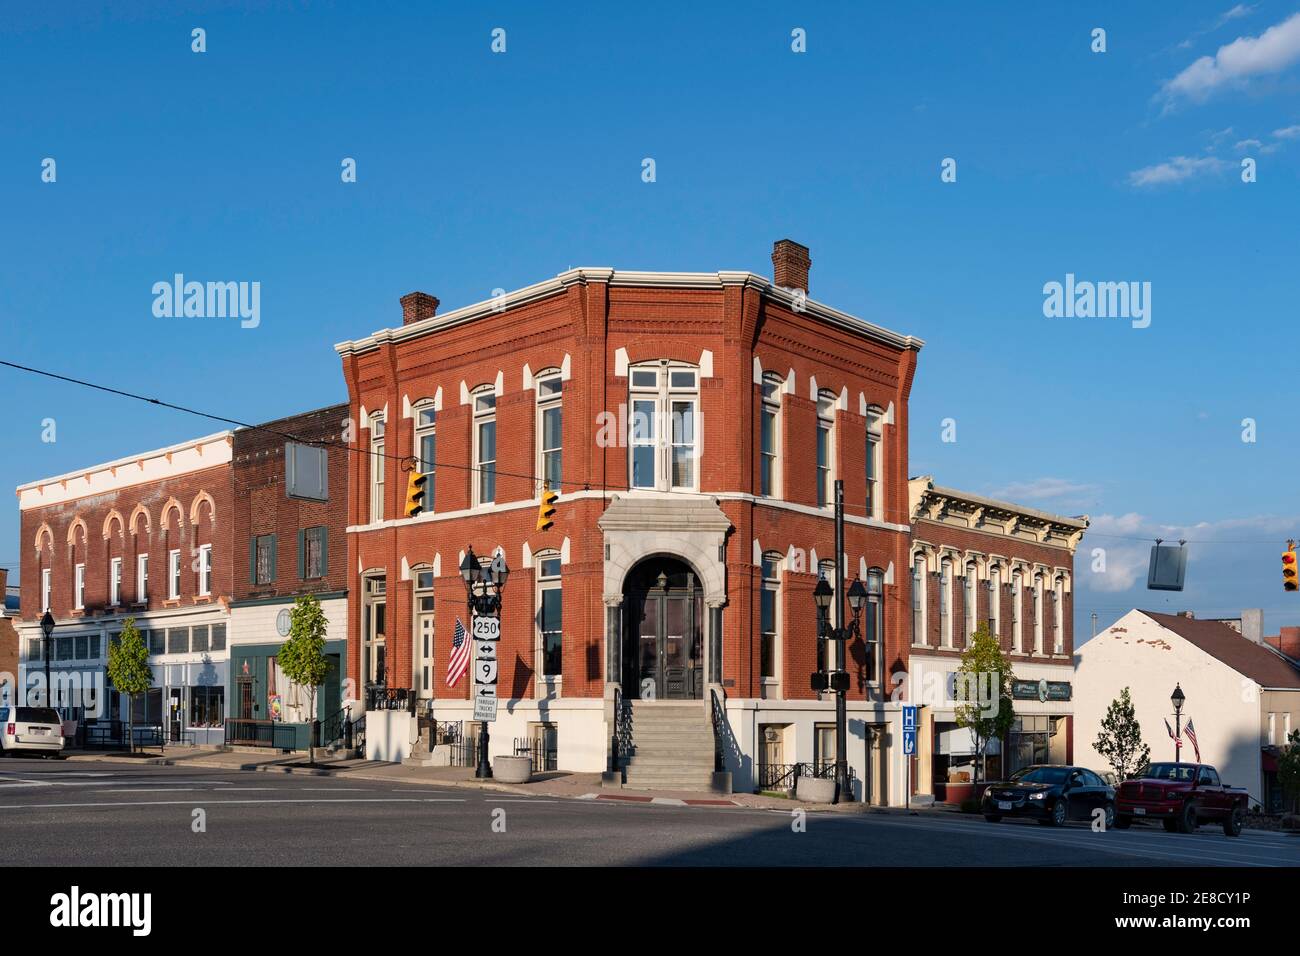 Cadiz, Ohio/USA-May 15, 2019: Old Harrison National Bank building built ca. 1887 in Queen Anne architectural style located on East Main Street in Cadi Stock Photo